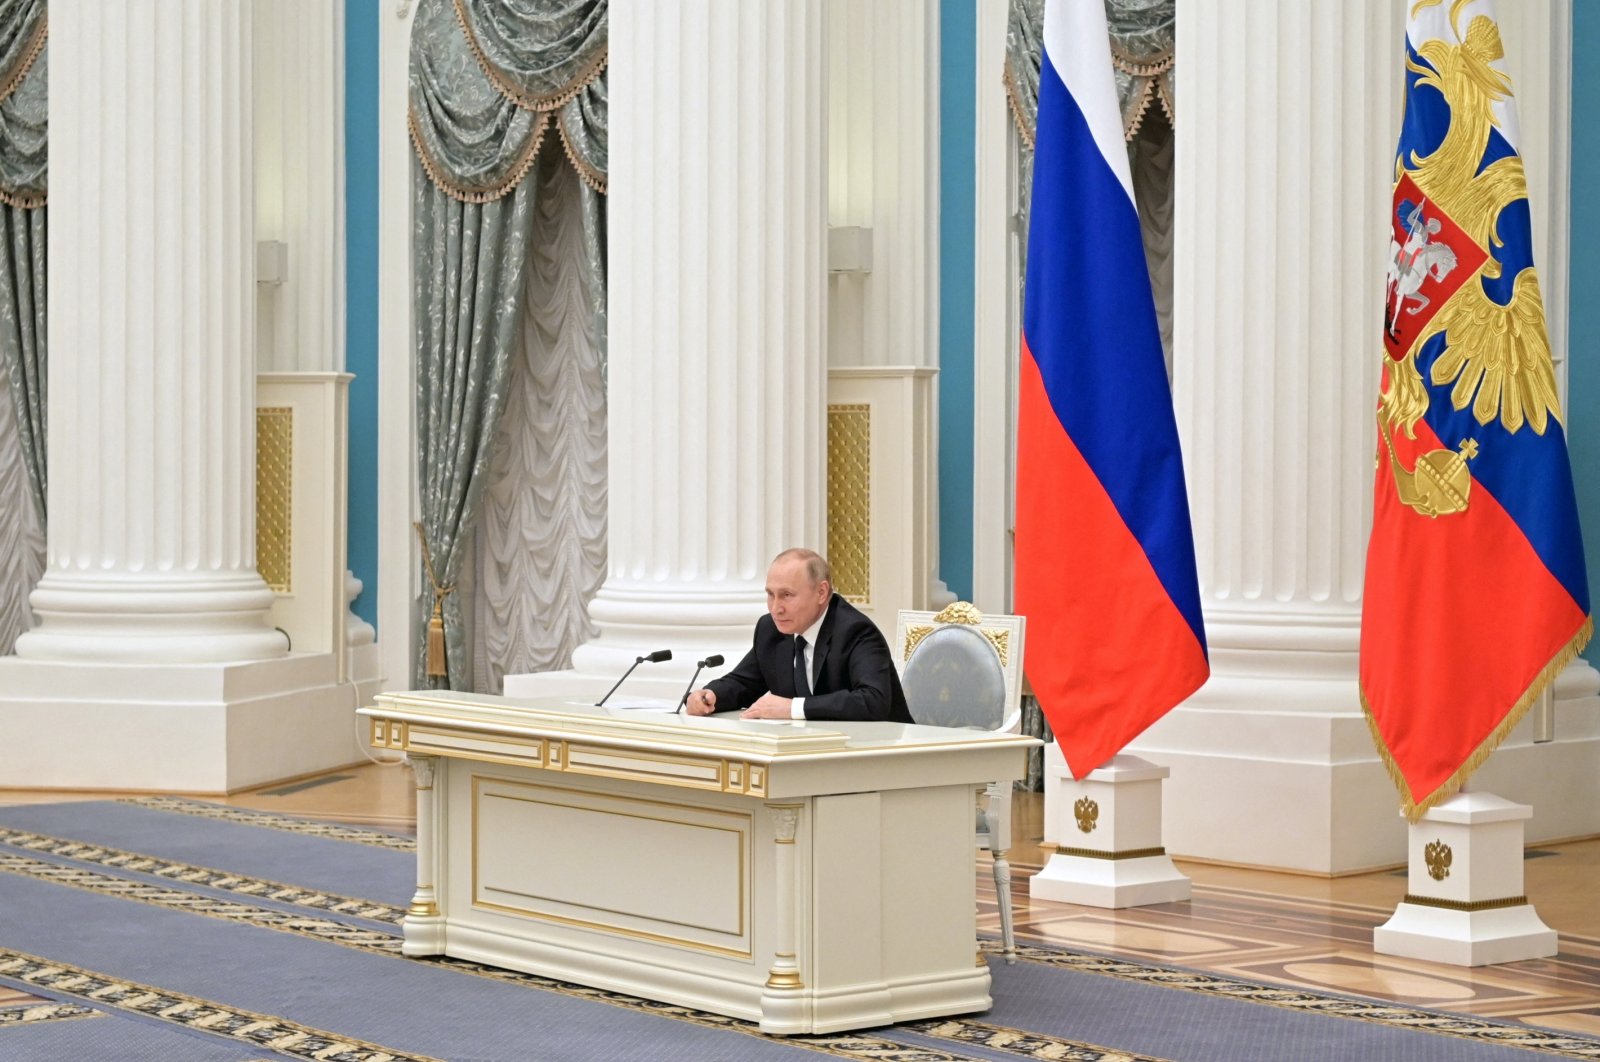 Russian President Vladimir Putin attends a meeting with representatives of the business community at the Kremlin in Moscow, Russia, Feb. 24, 2022. (Kremlin via Reuters)